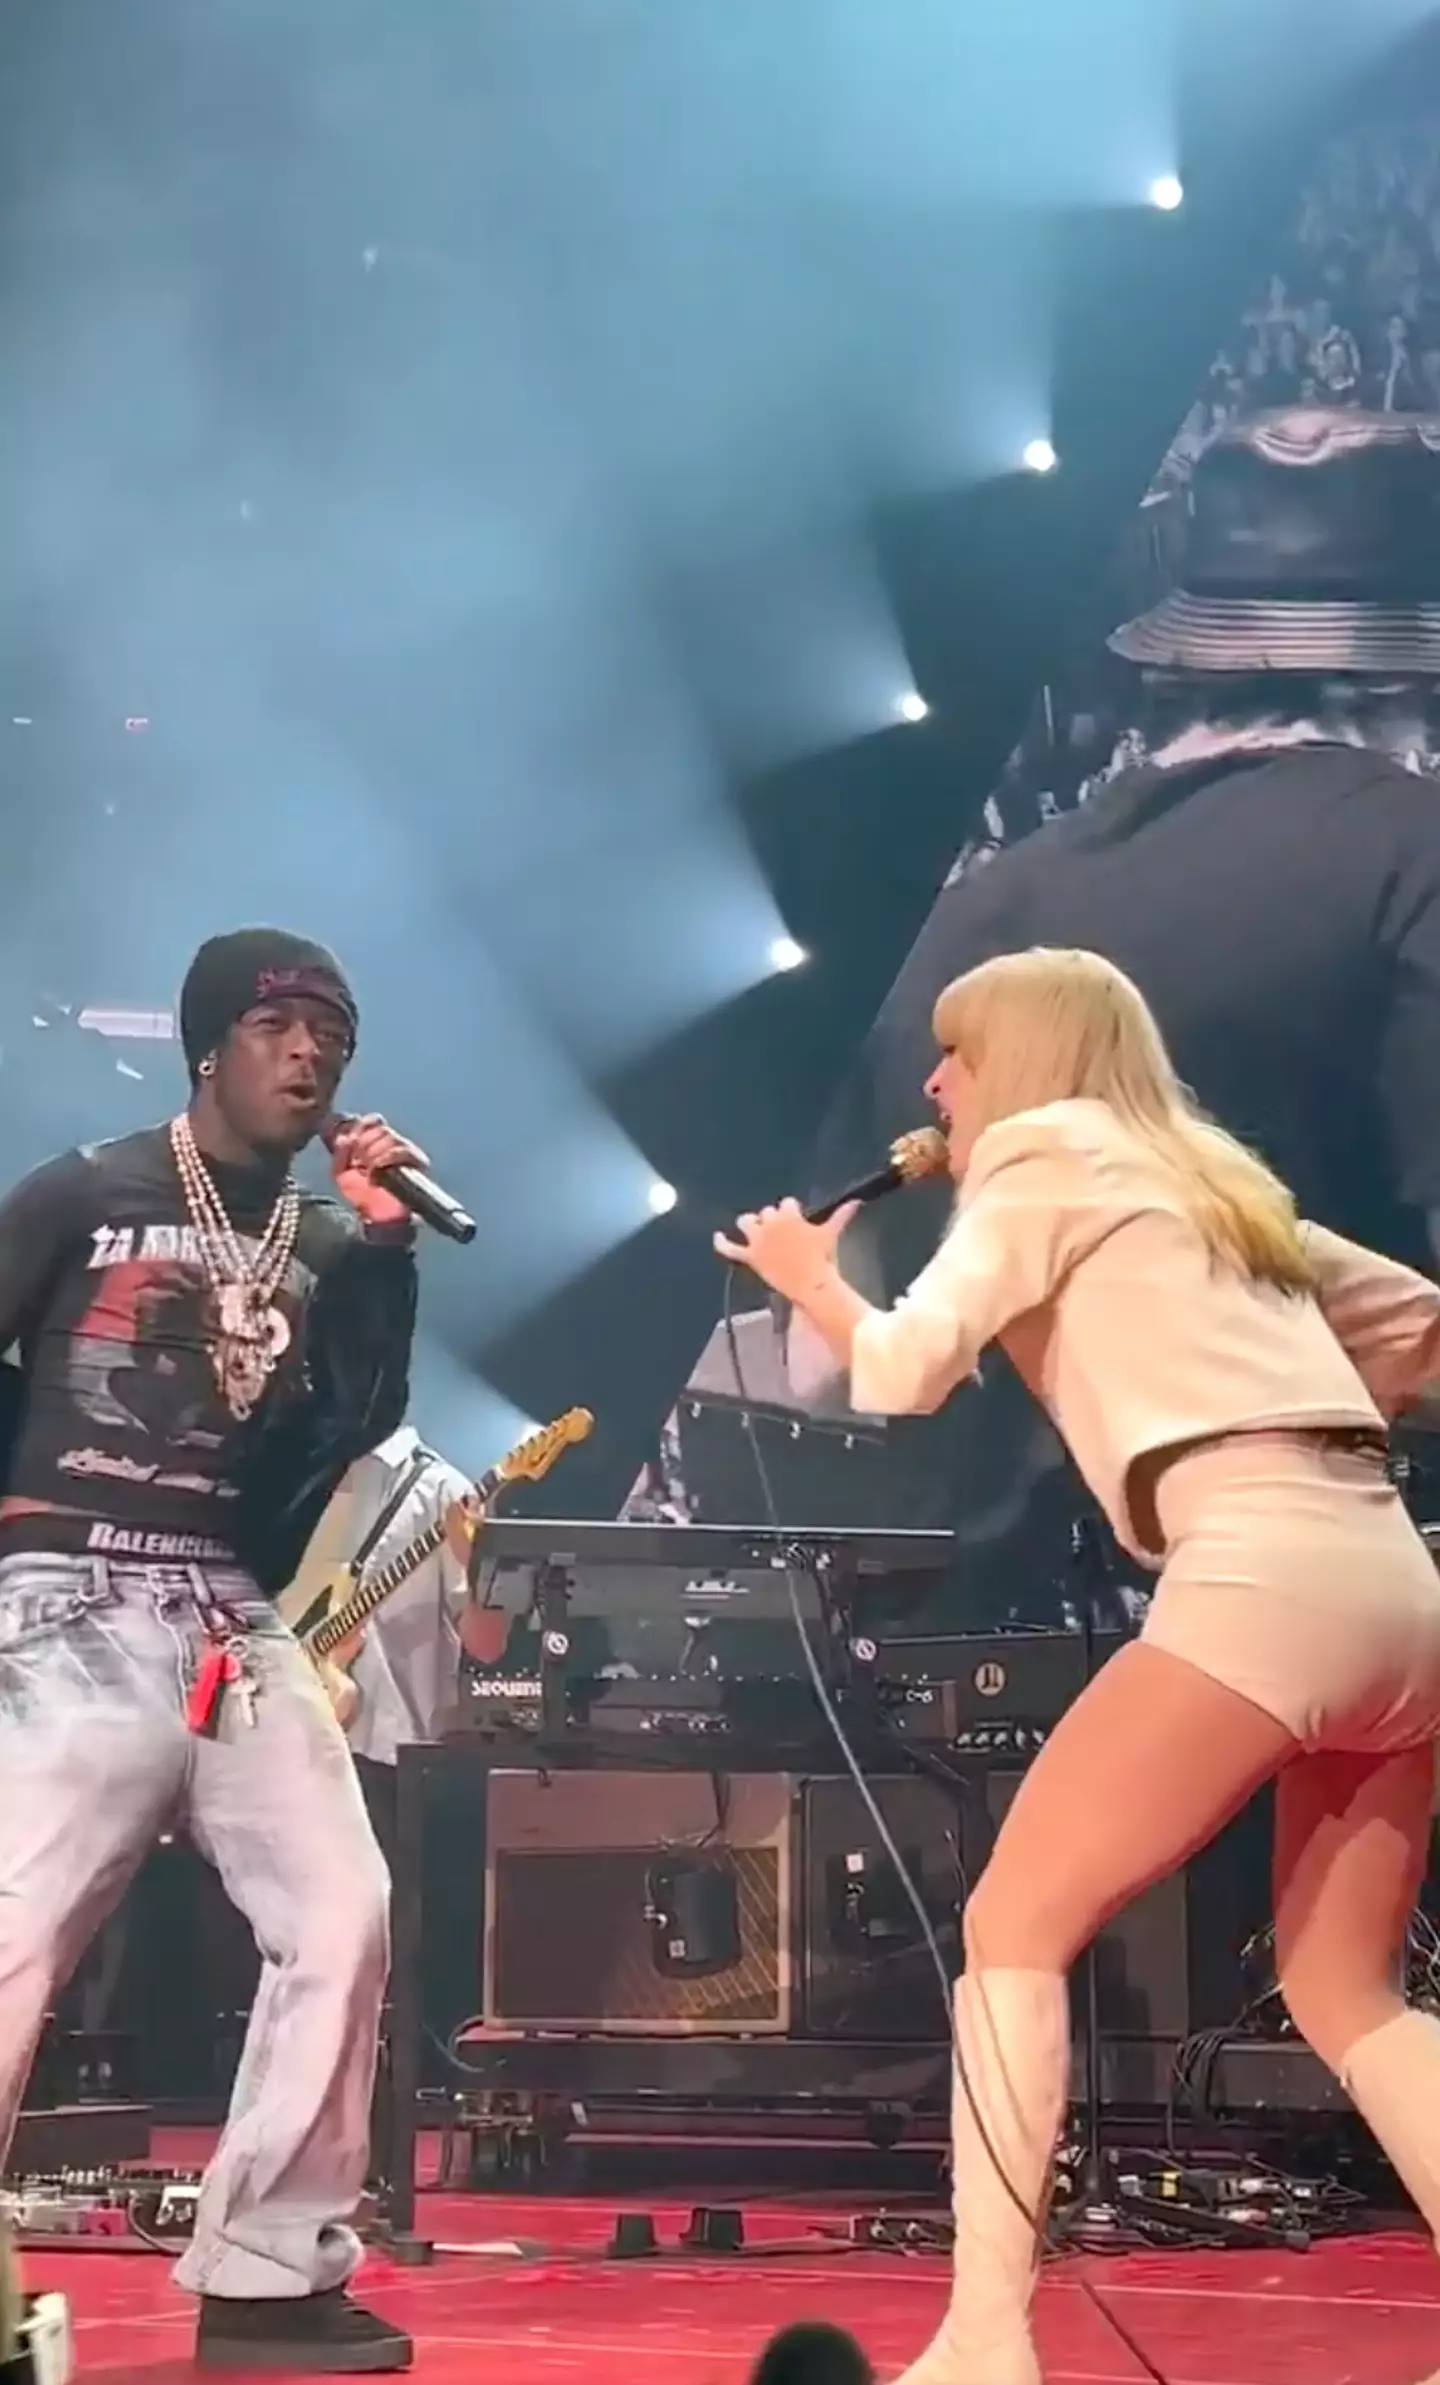 Some fans are confused about Lil Uzi Vert and Paramore's performance.